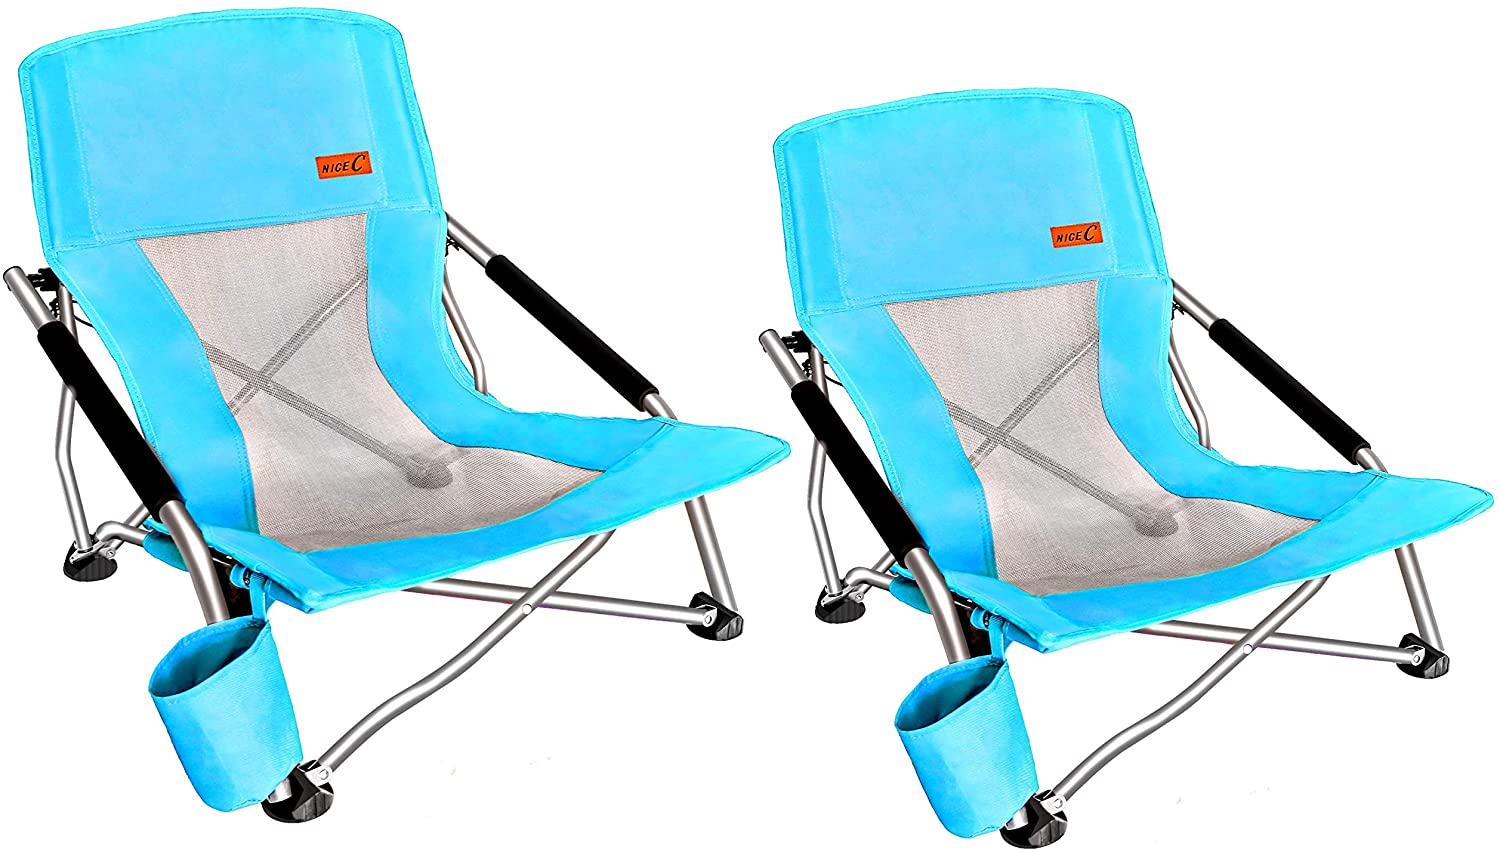 Nice C Industrial Grade Low Foldable Beach Chairs, 2-Piece